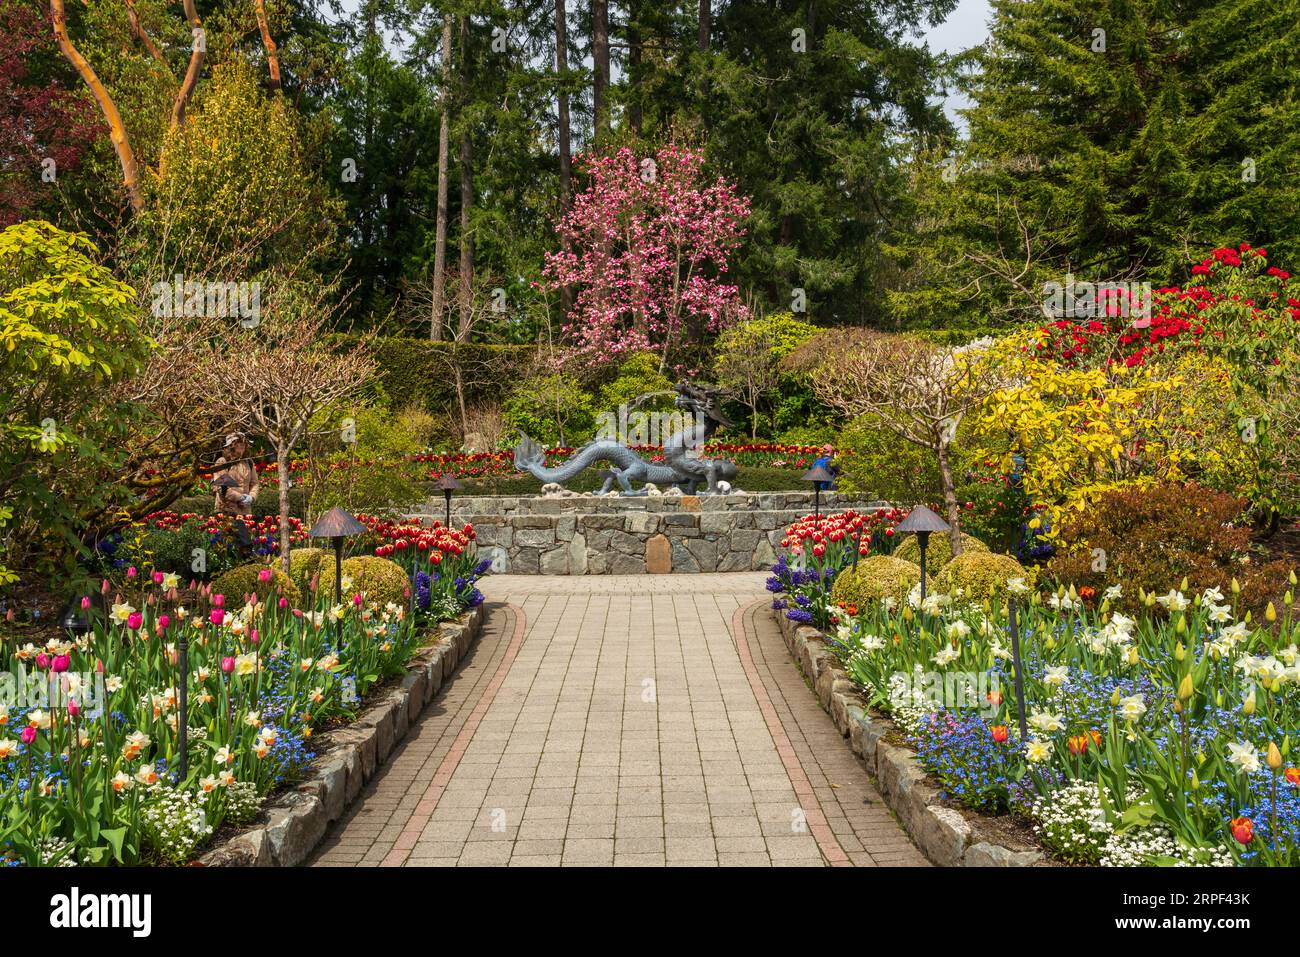 The spring season flower display at the Butchart Gardens, Victoria, Vancouver Island, British Columbia, Canada. Stock Photo